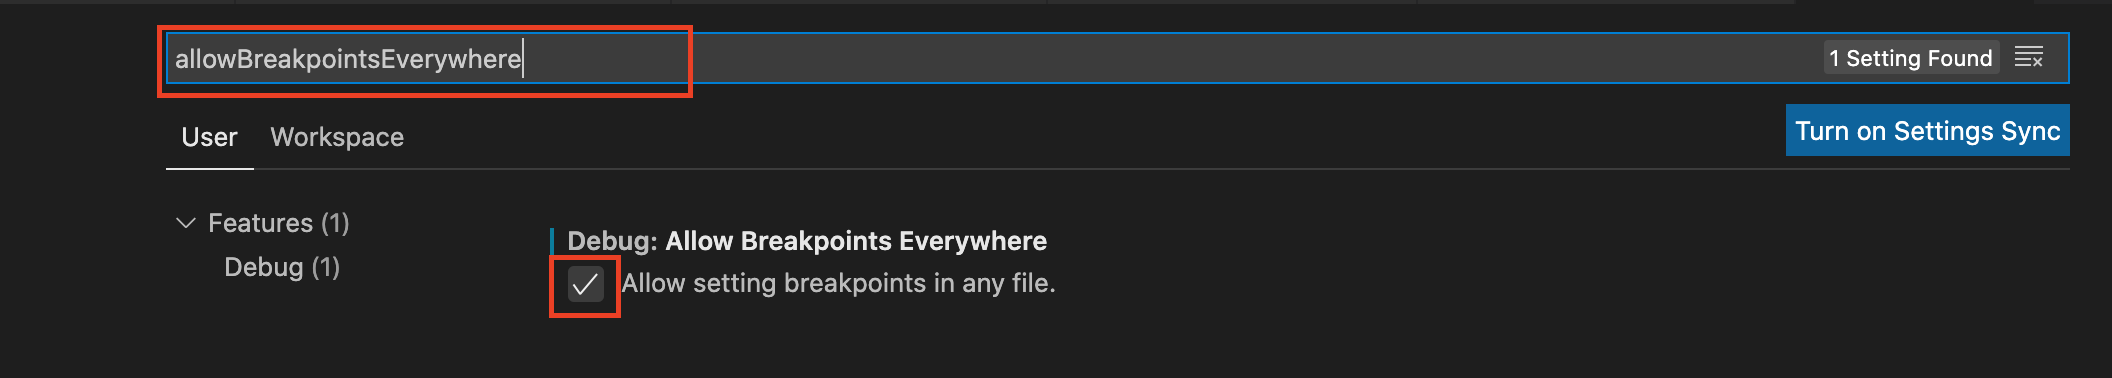 Allow setting breakpoints in any file